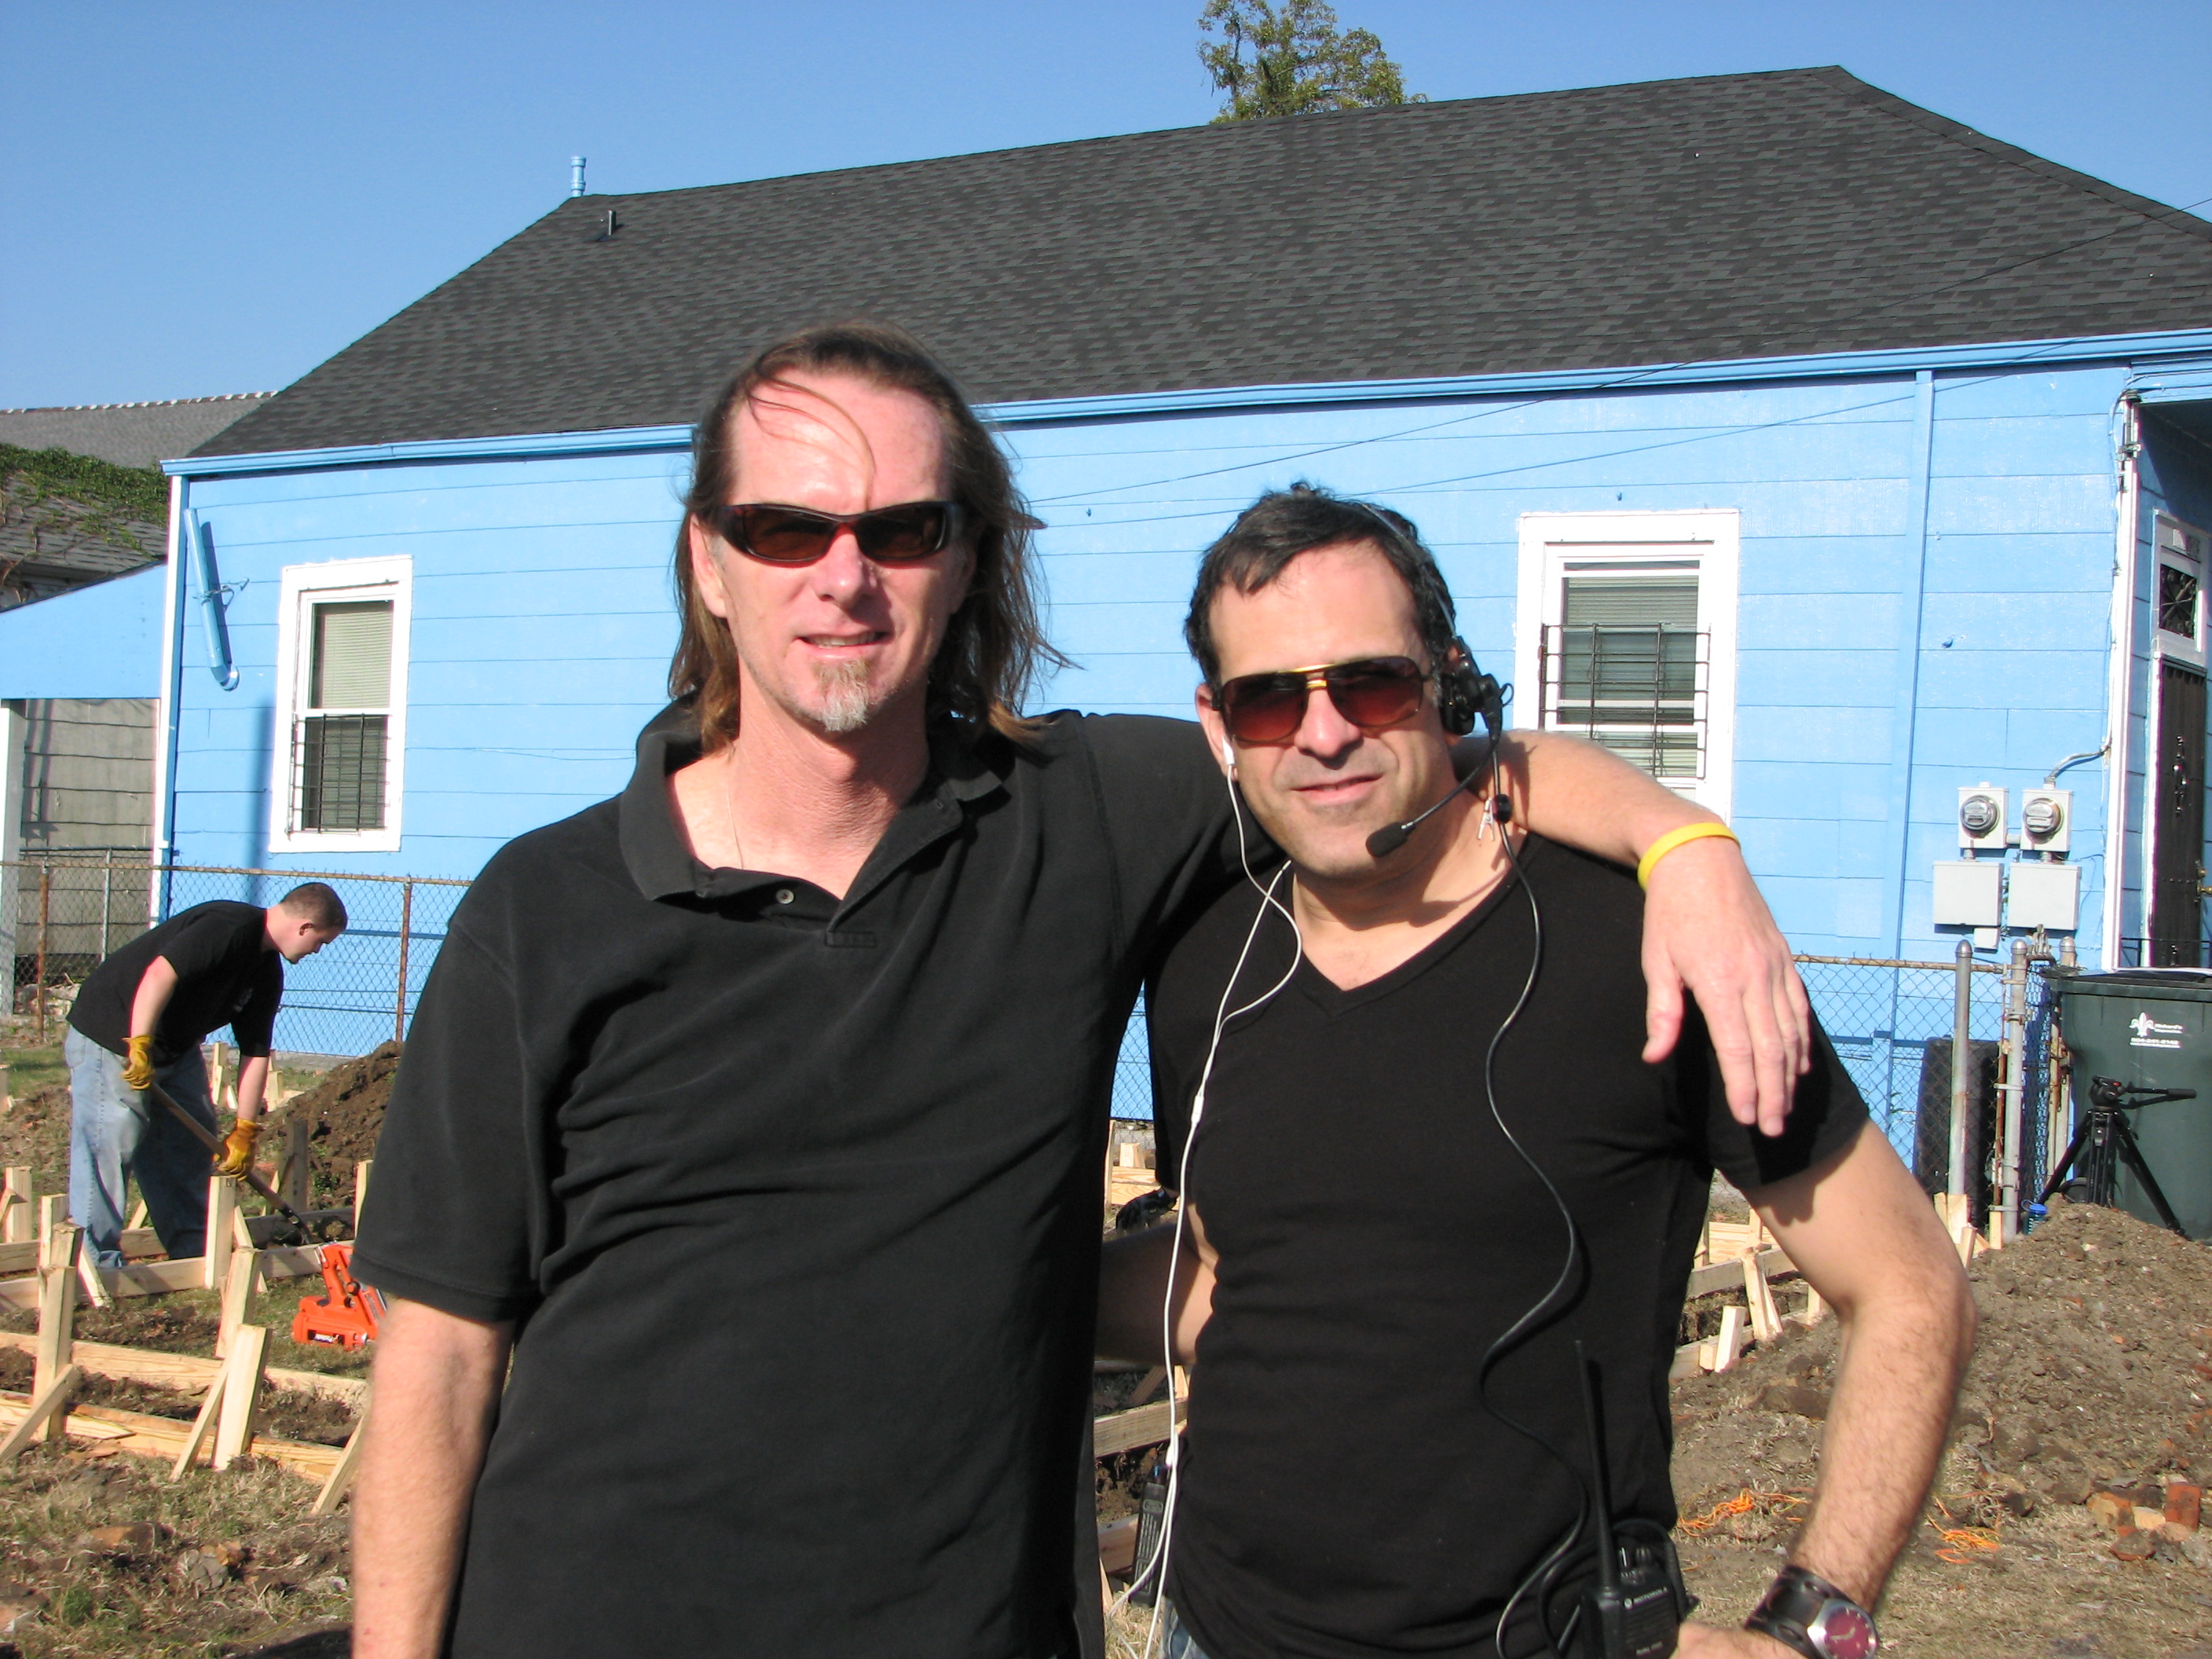 Stan Bertheaud and Michael Selditch (creators) on location in New Orleans shooting Architecture School.